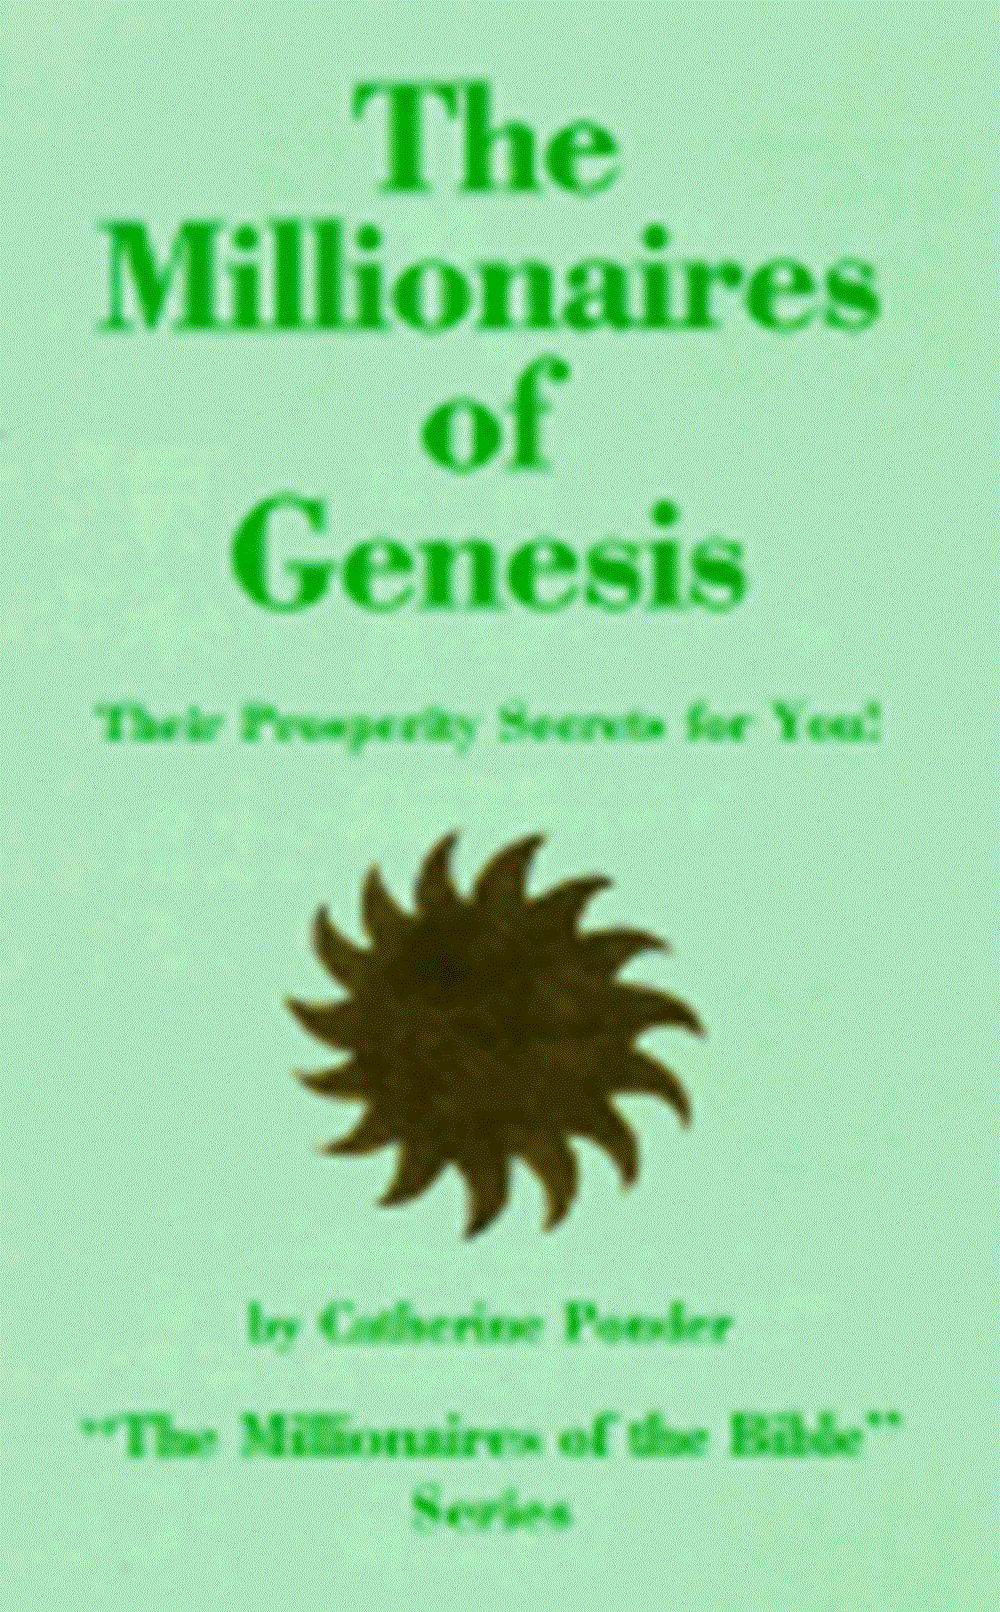 Millionaires of Genesis: Their Prosperity Secrets for You! (the Millionaires of the Bible Series) (R